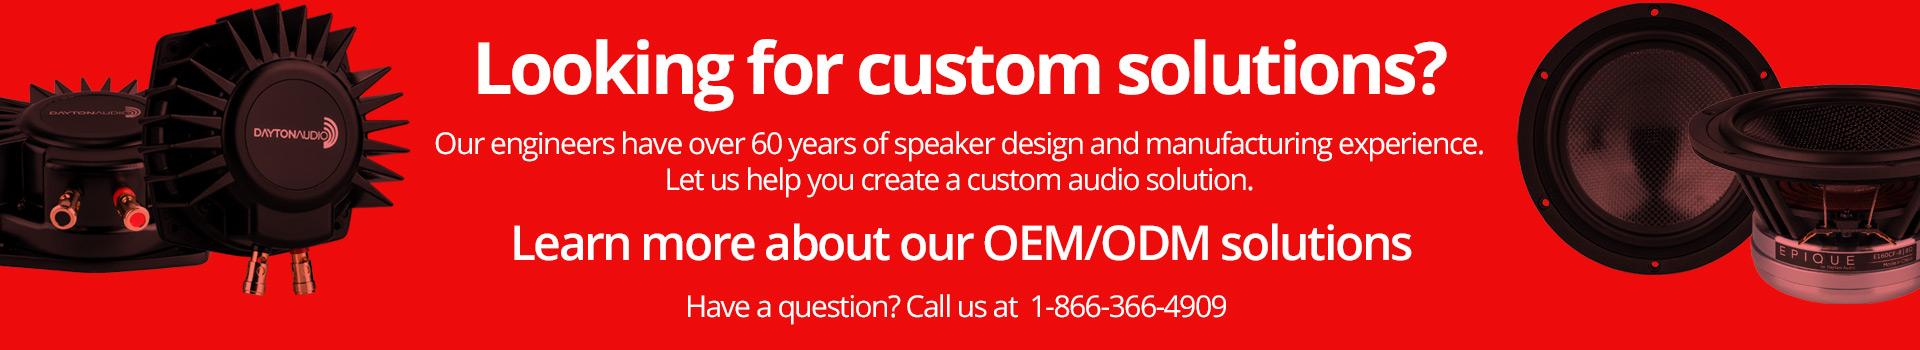 Looking for OEM custom solutions learn more about our OEM/ODM services and request a large quantity quote